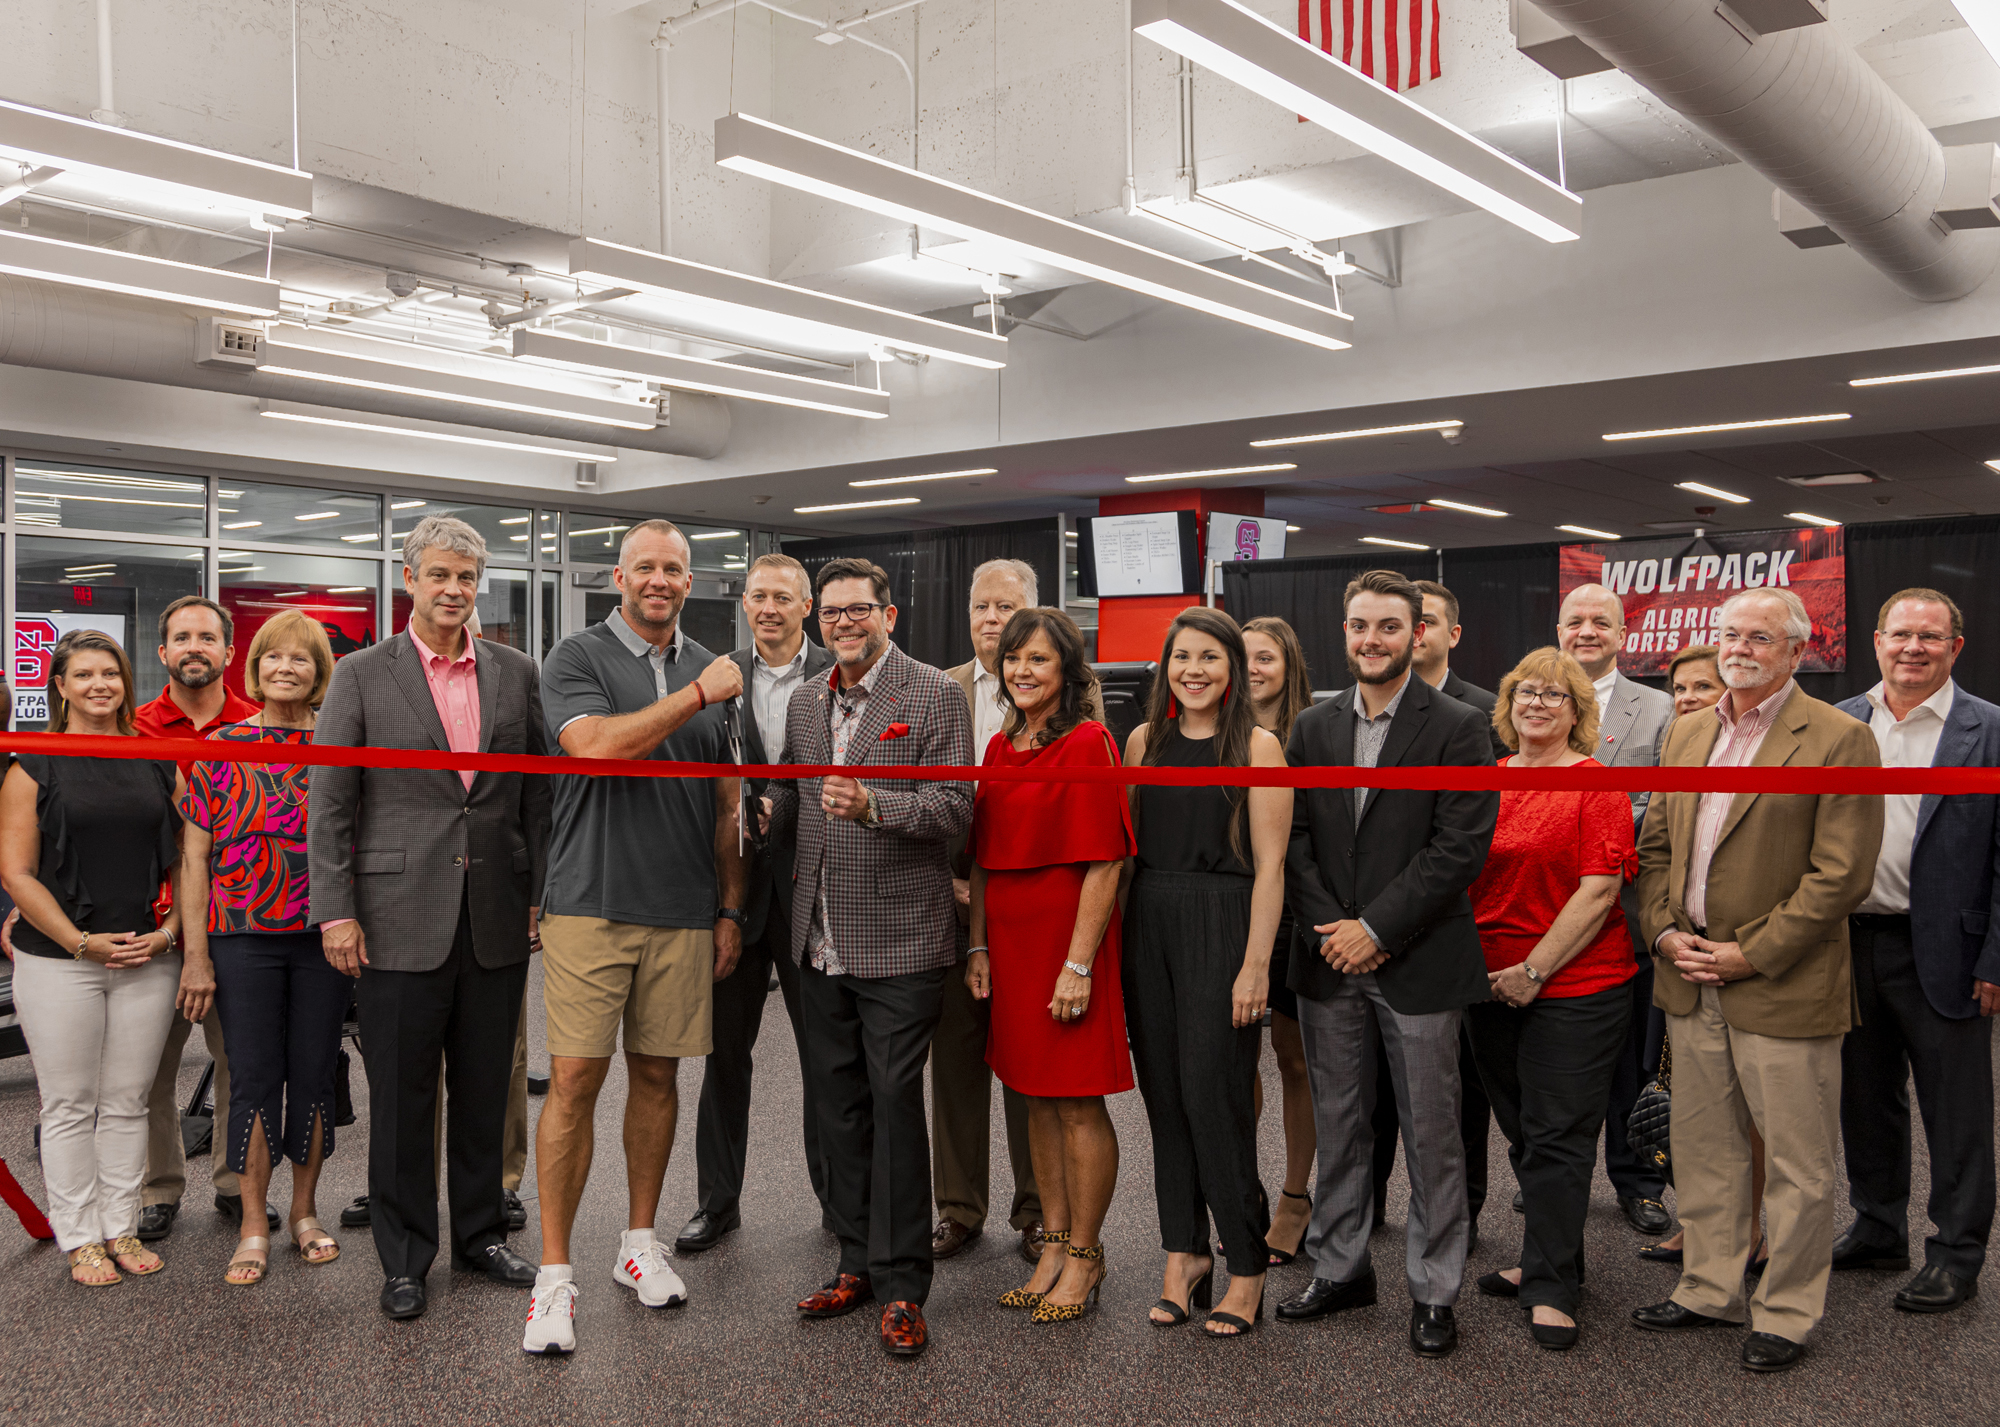 The Albright family celebrate the opening of the Albright Sports Medicine Center at NC State University with NC State football coach Dave Doeren.